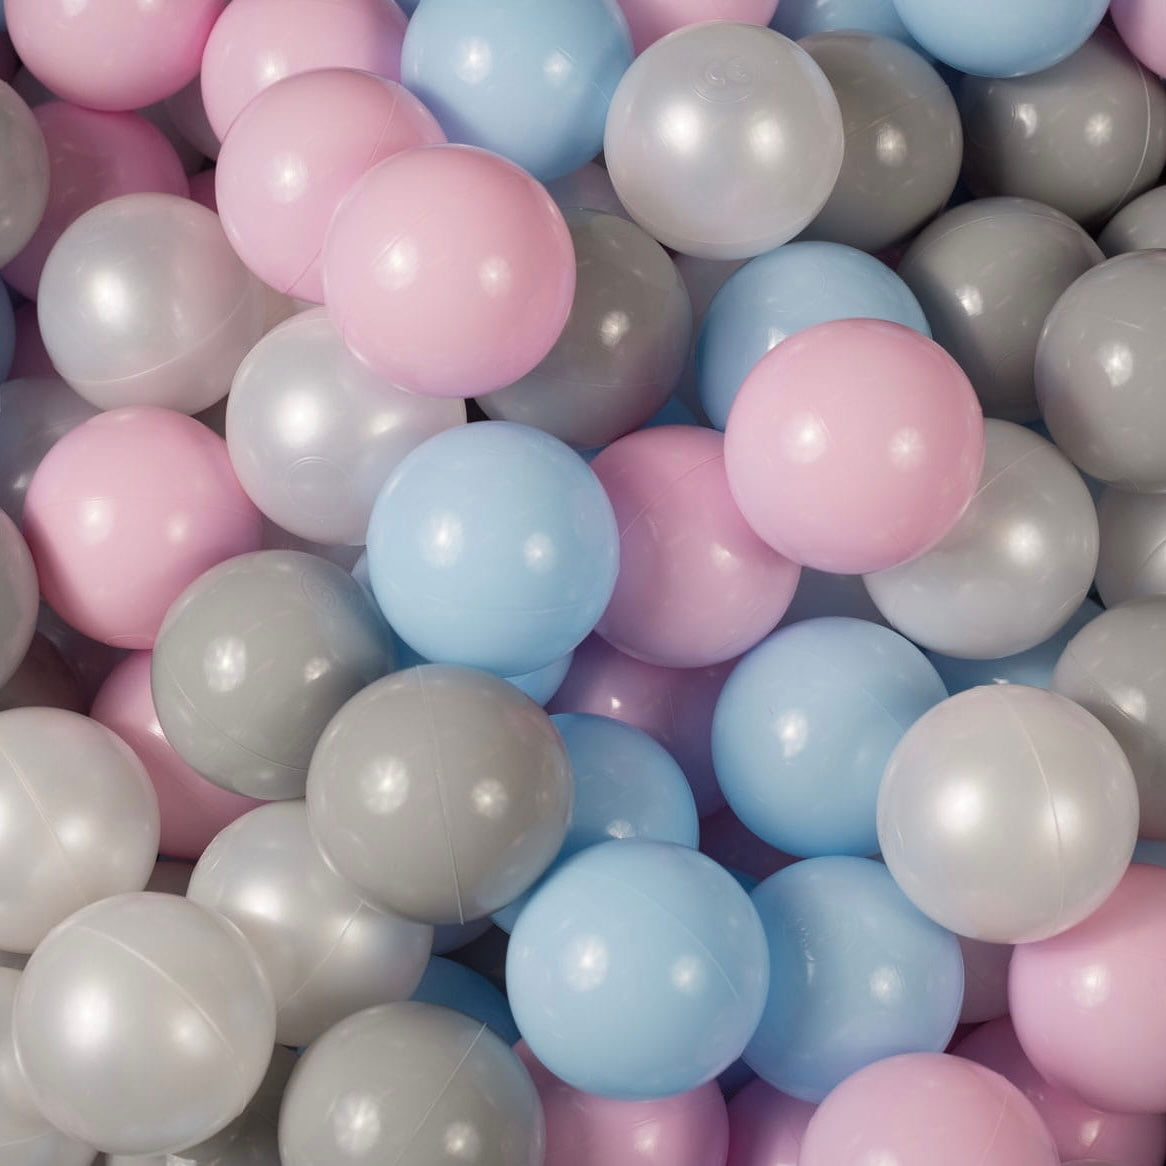 Make Your Own Square Ball Pit | Cotton Dark Grey